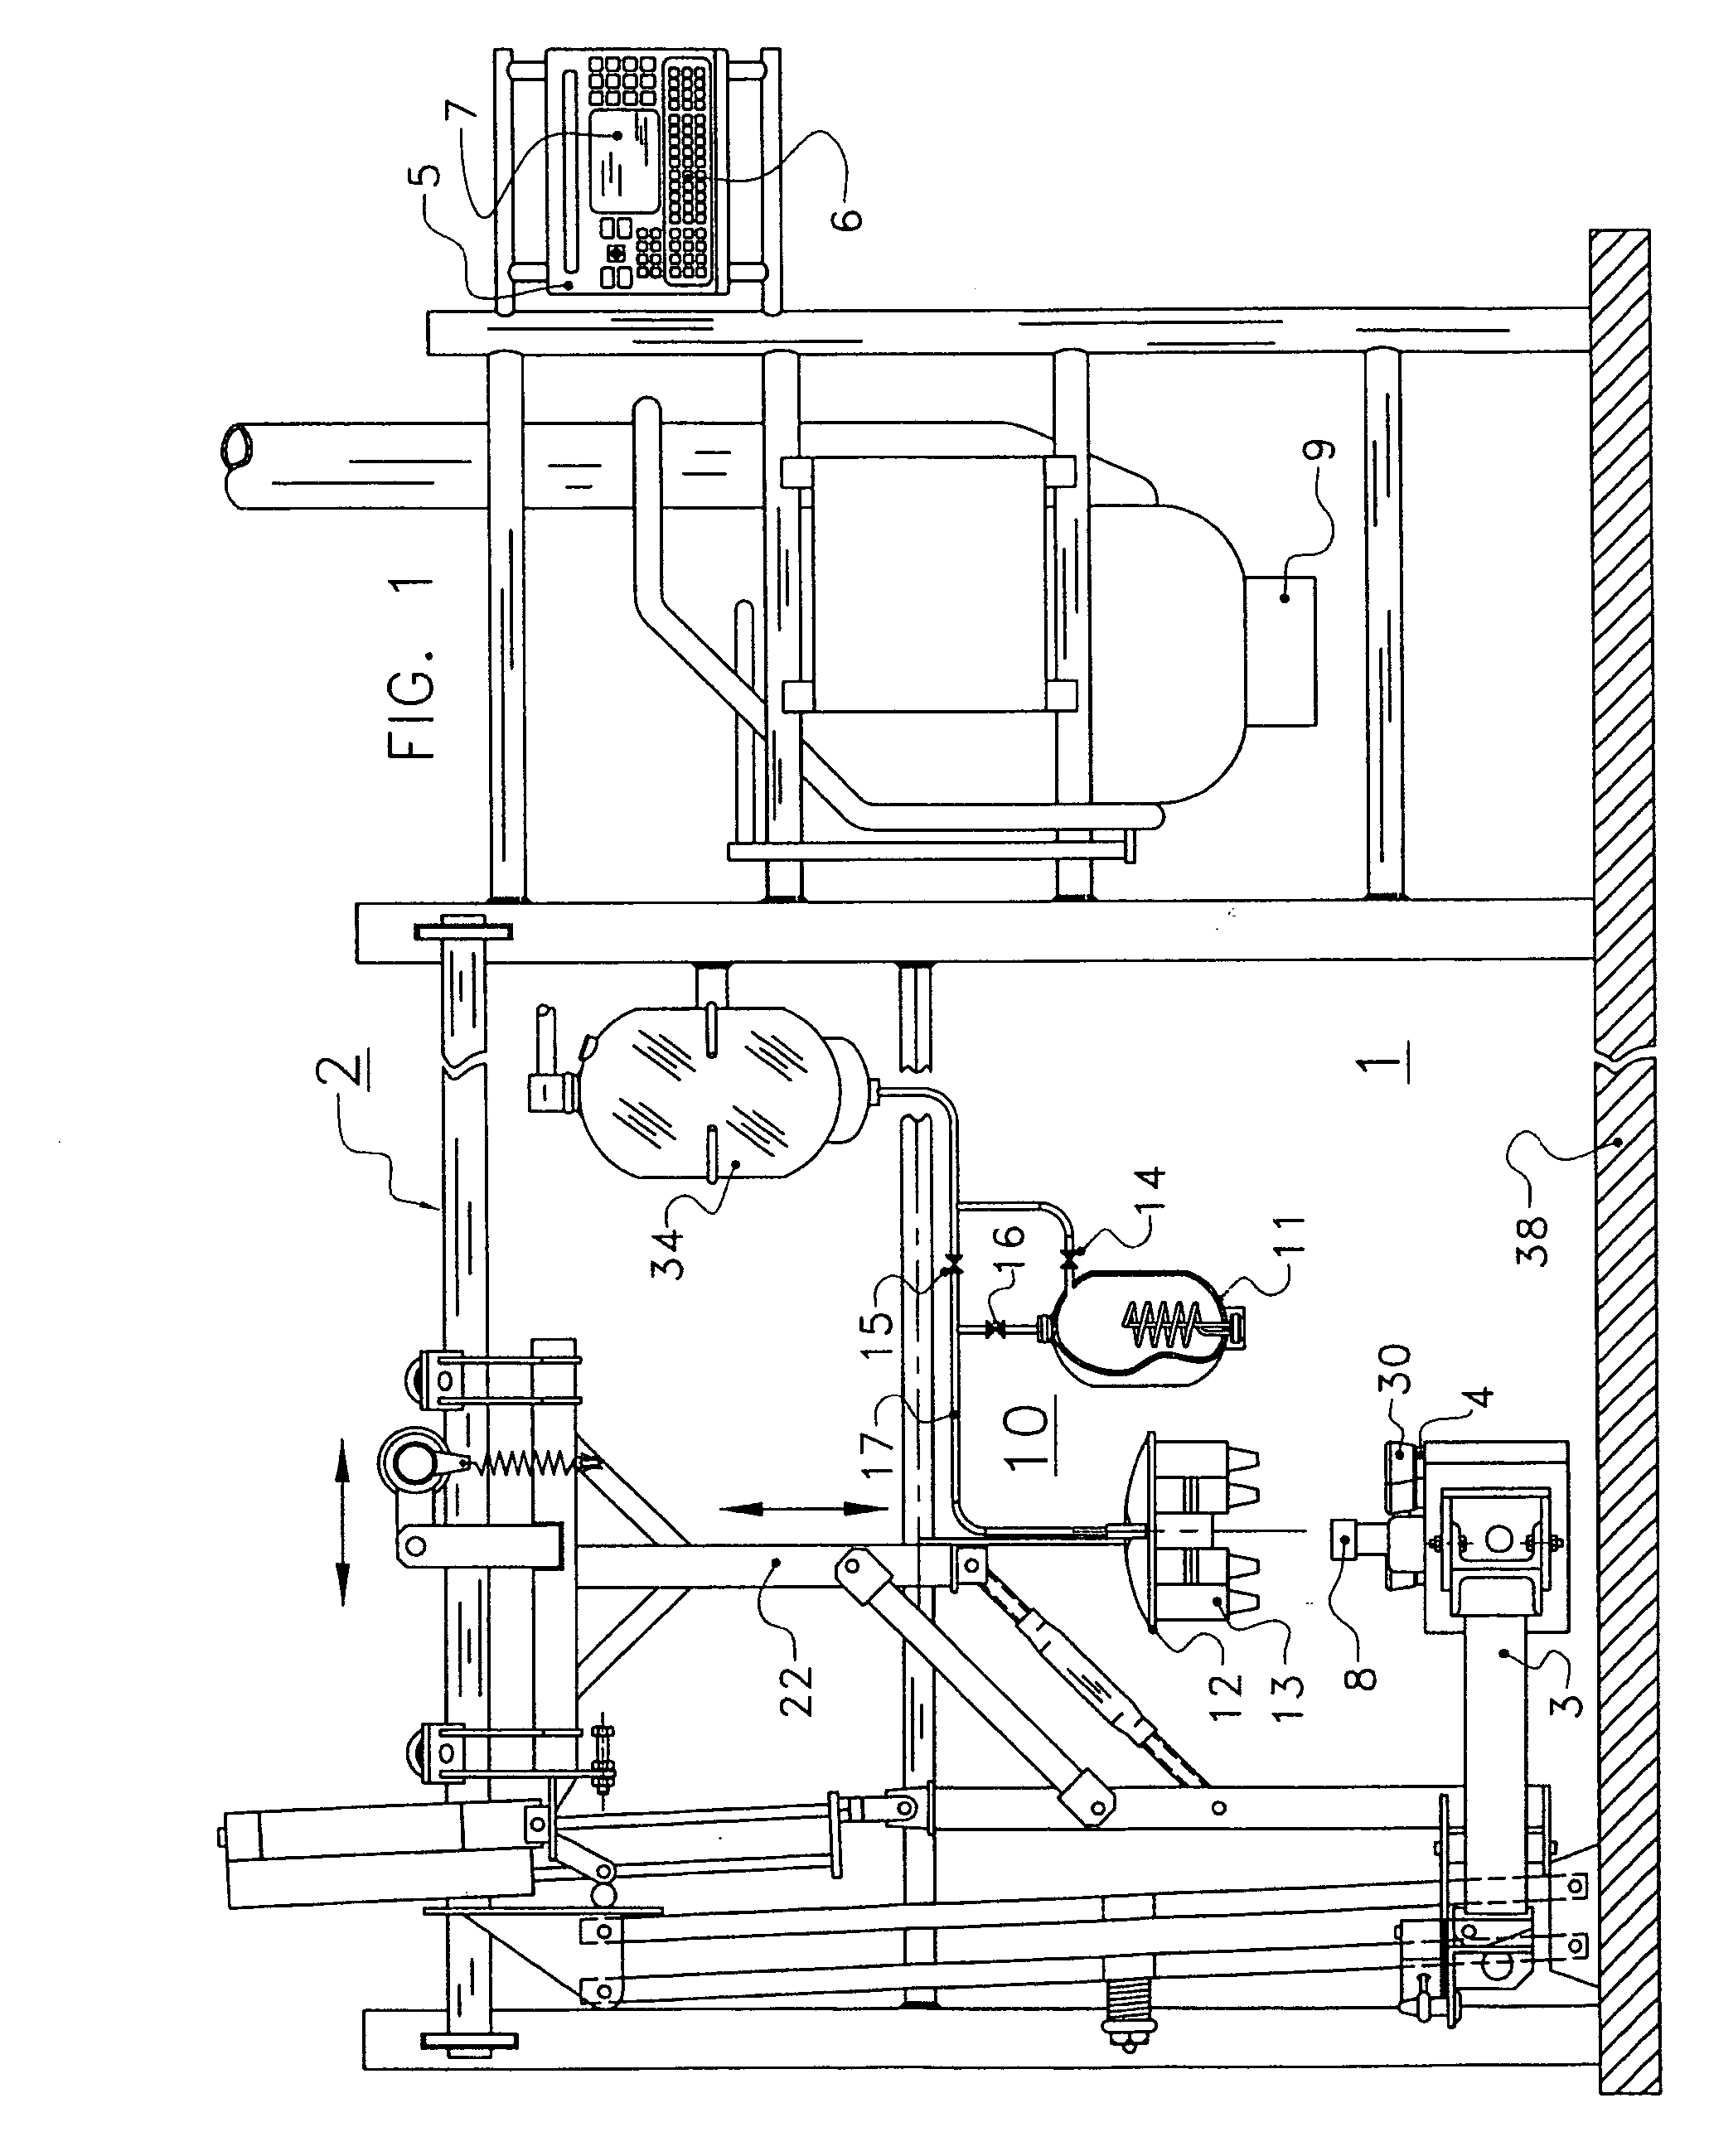 Method of and a device for milking a dairy animal